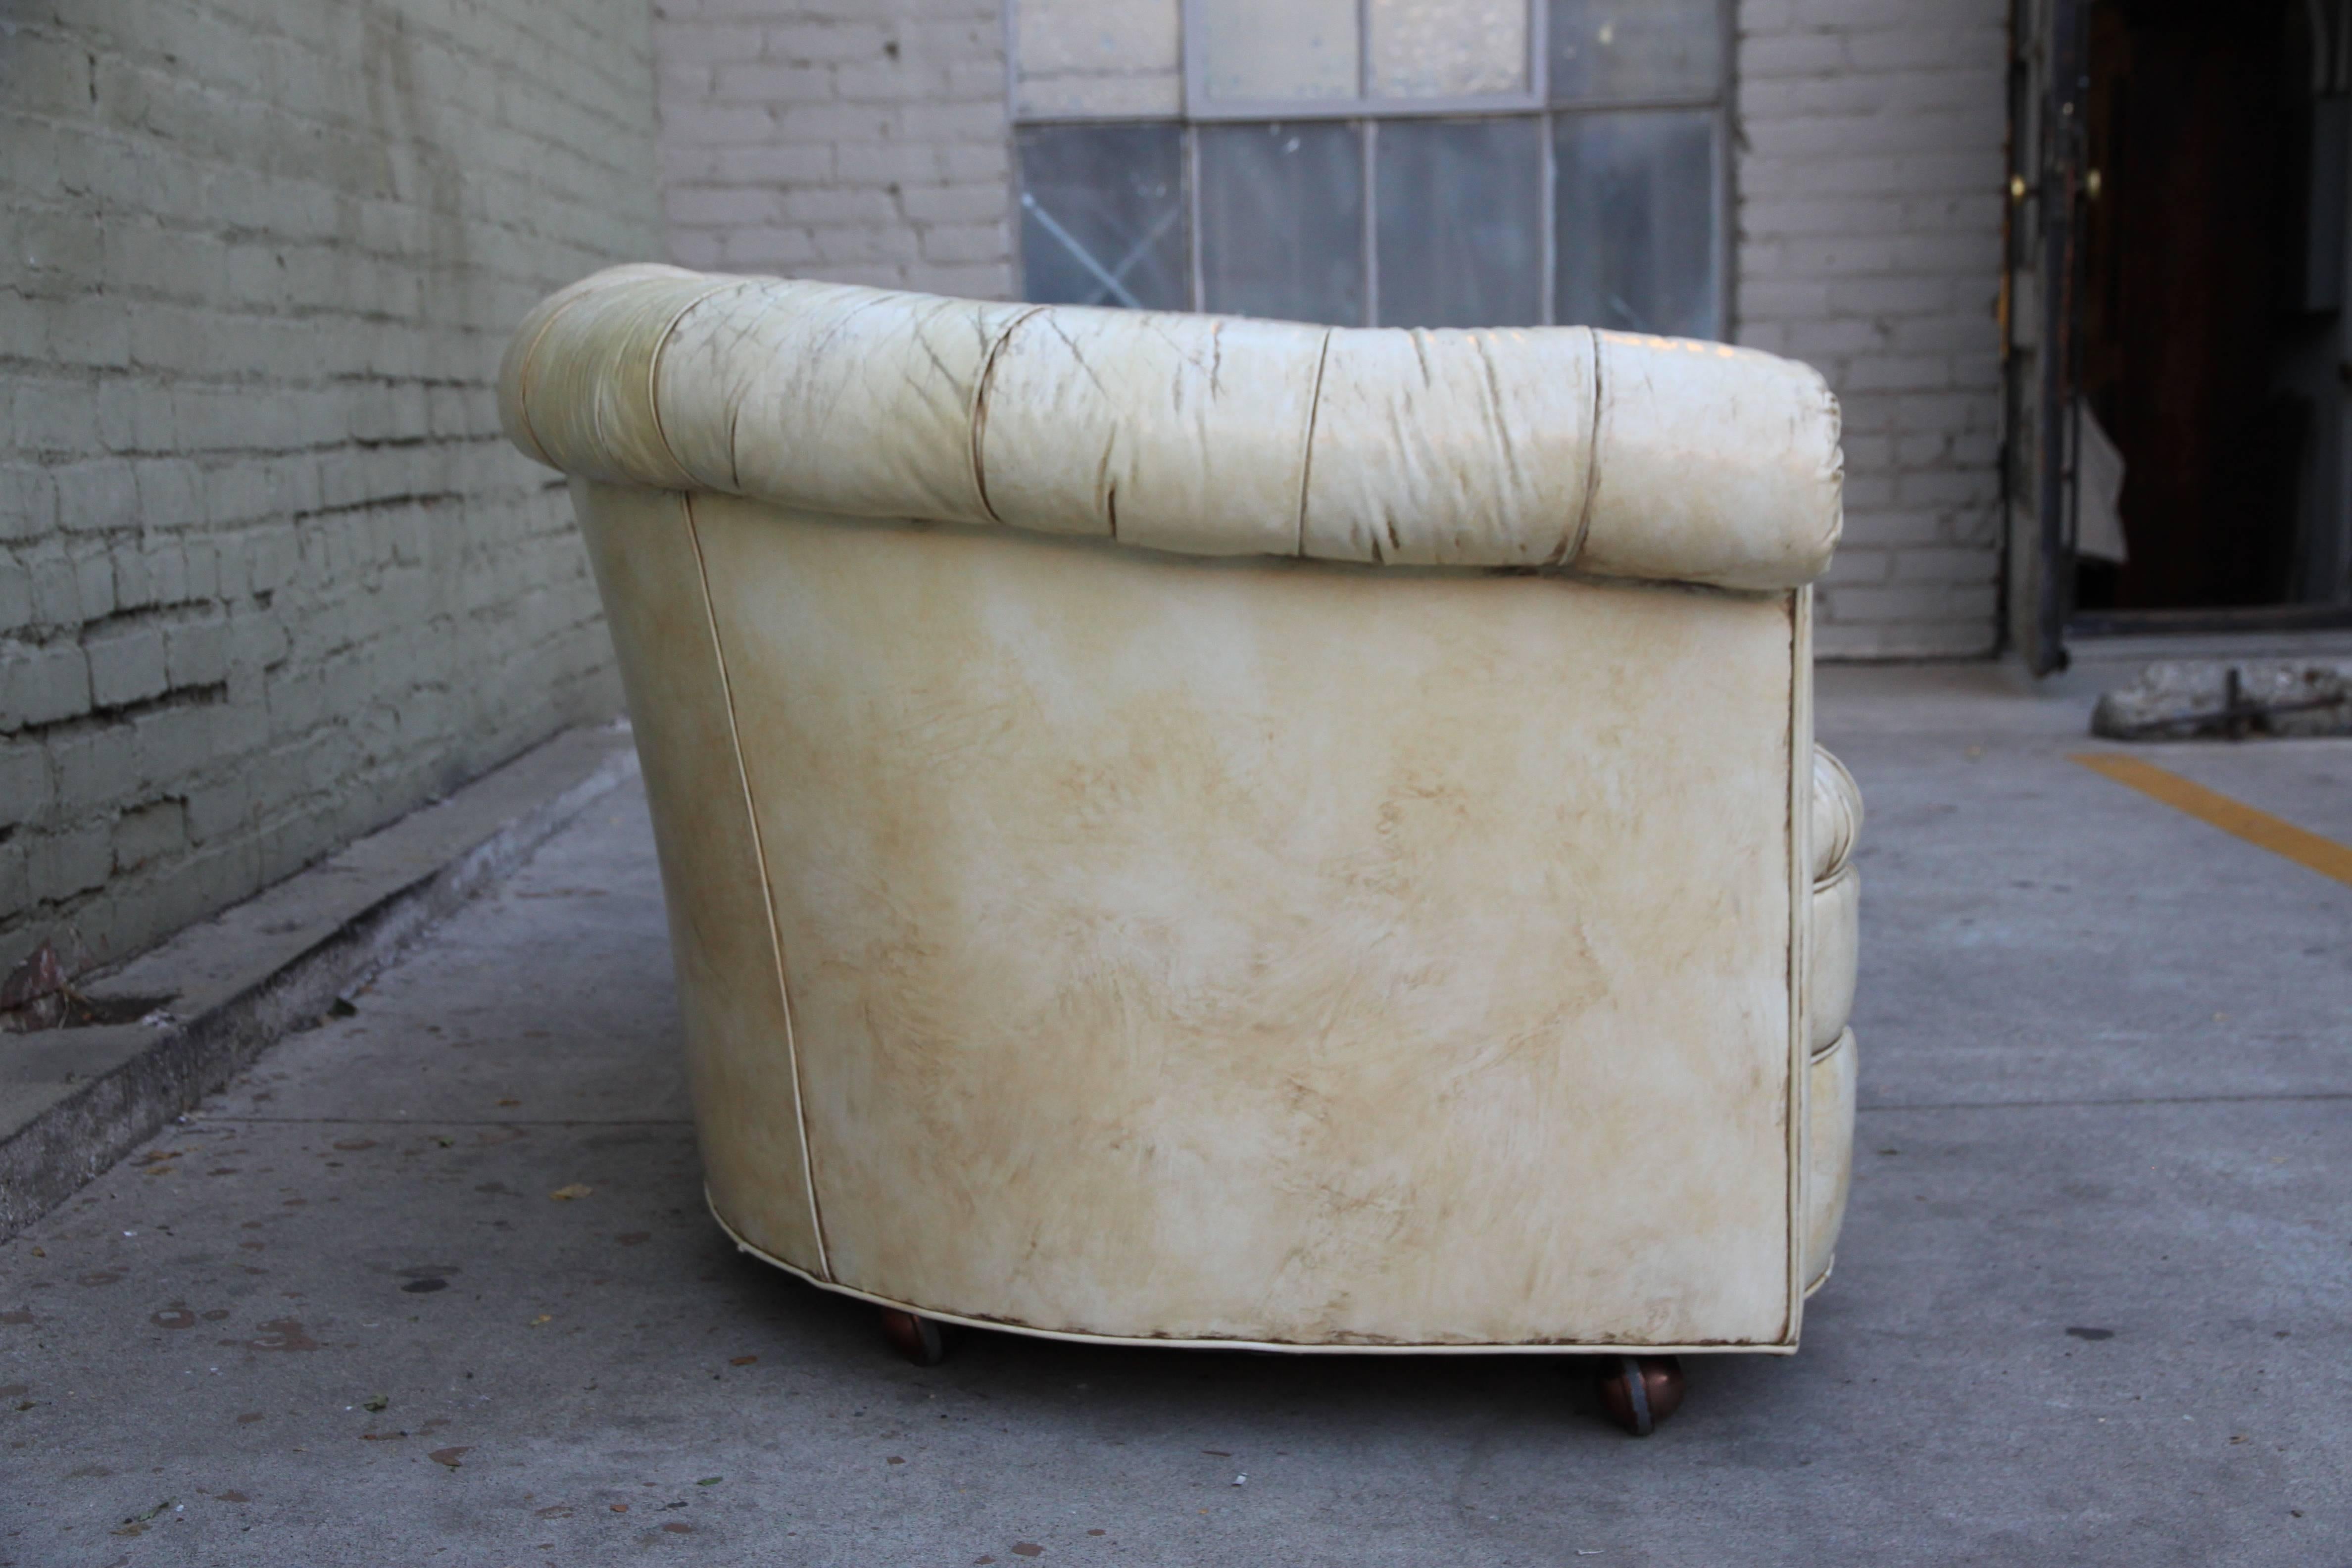 Leather tufted distressed Chesterfield style love seat.